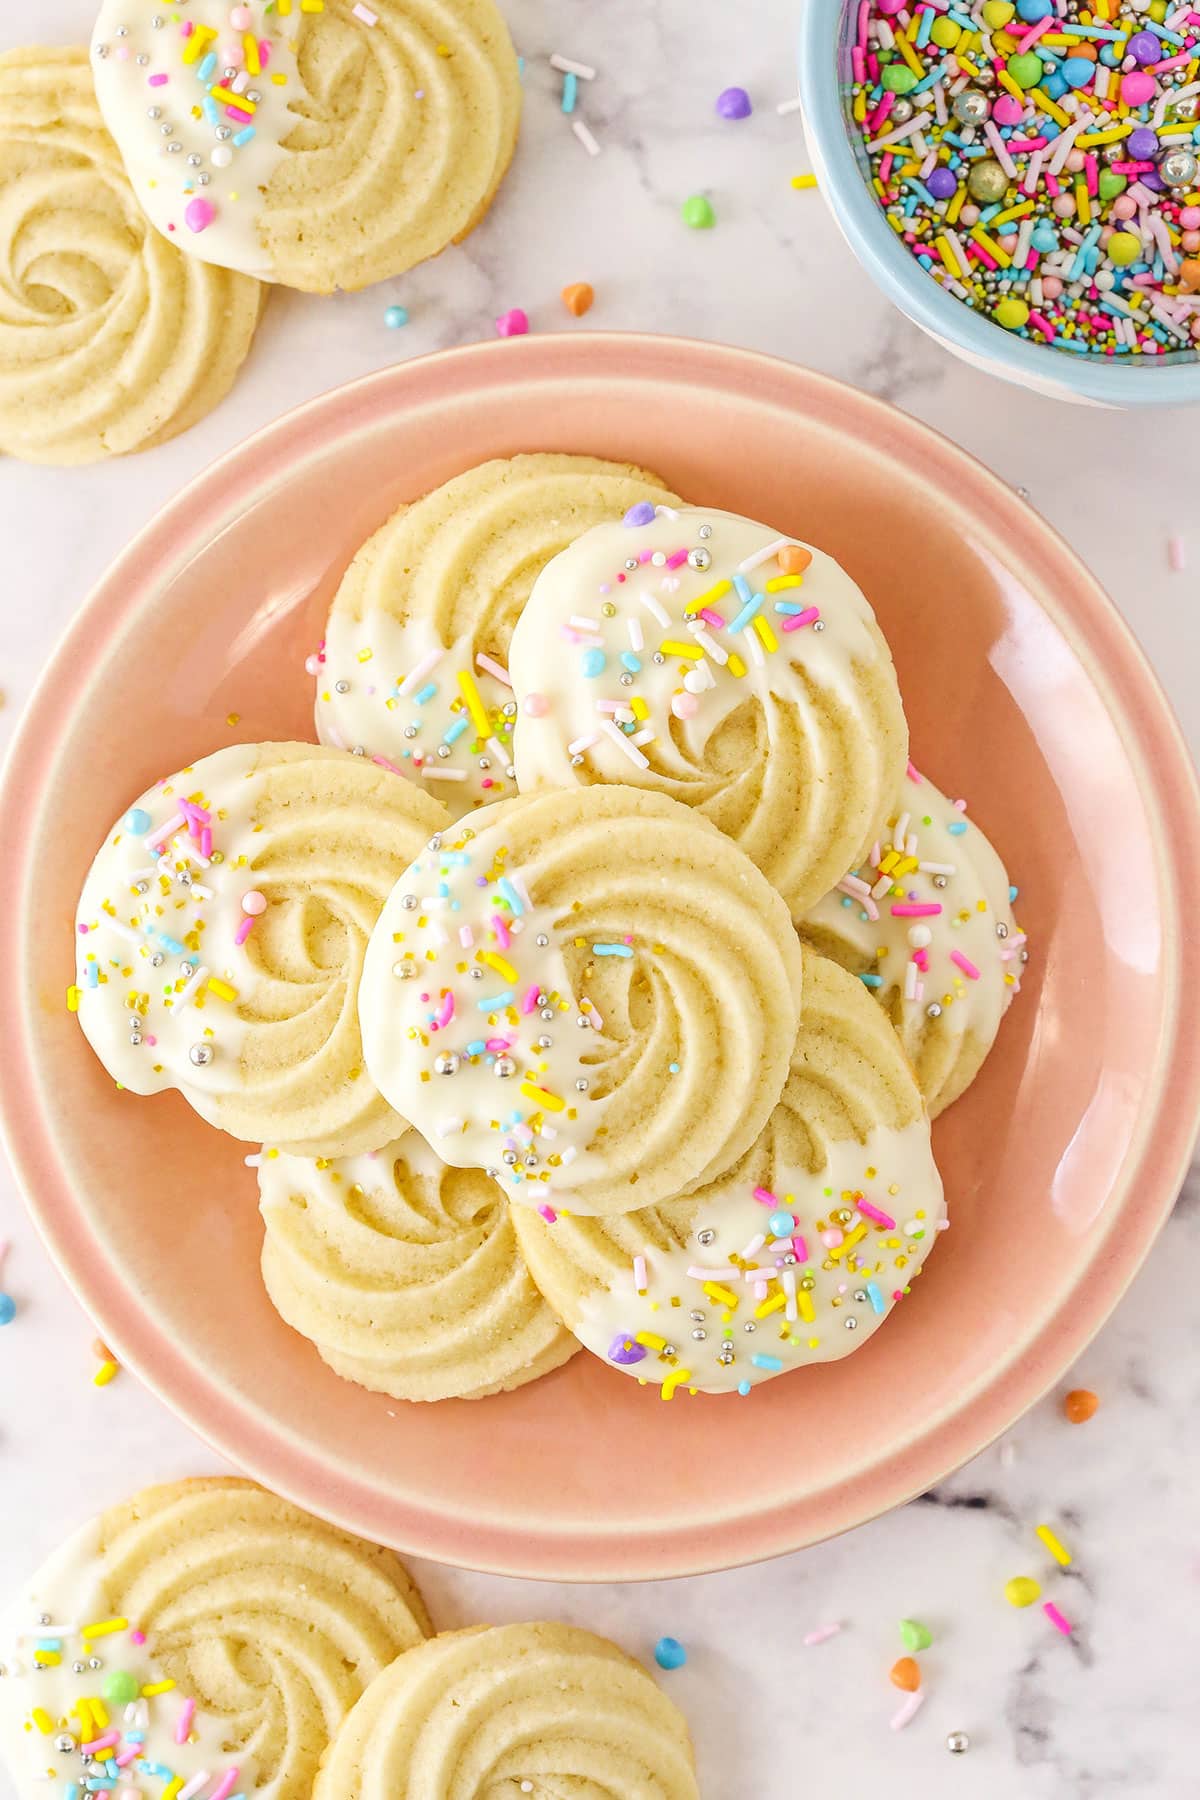 White Chocolate Butter Cookies on a Pale Pink Plate Beside a Bowl of Pastel Sprinkles